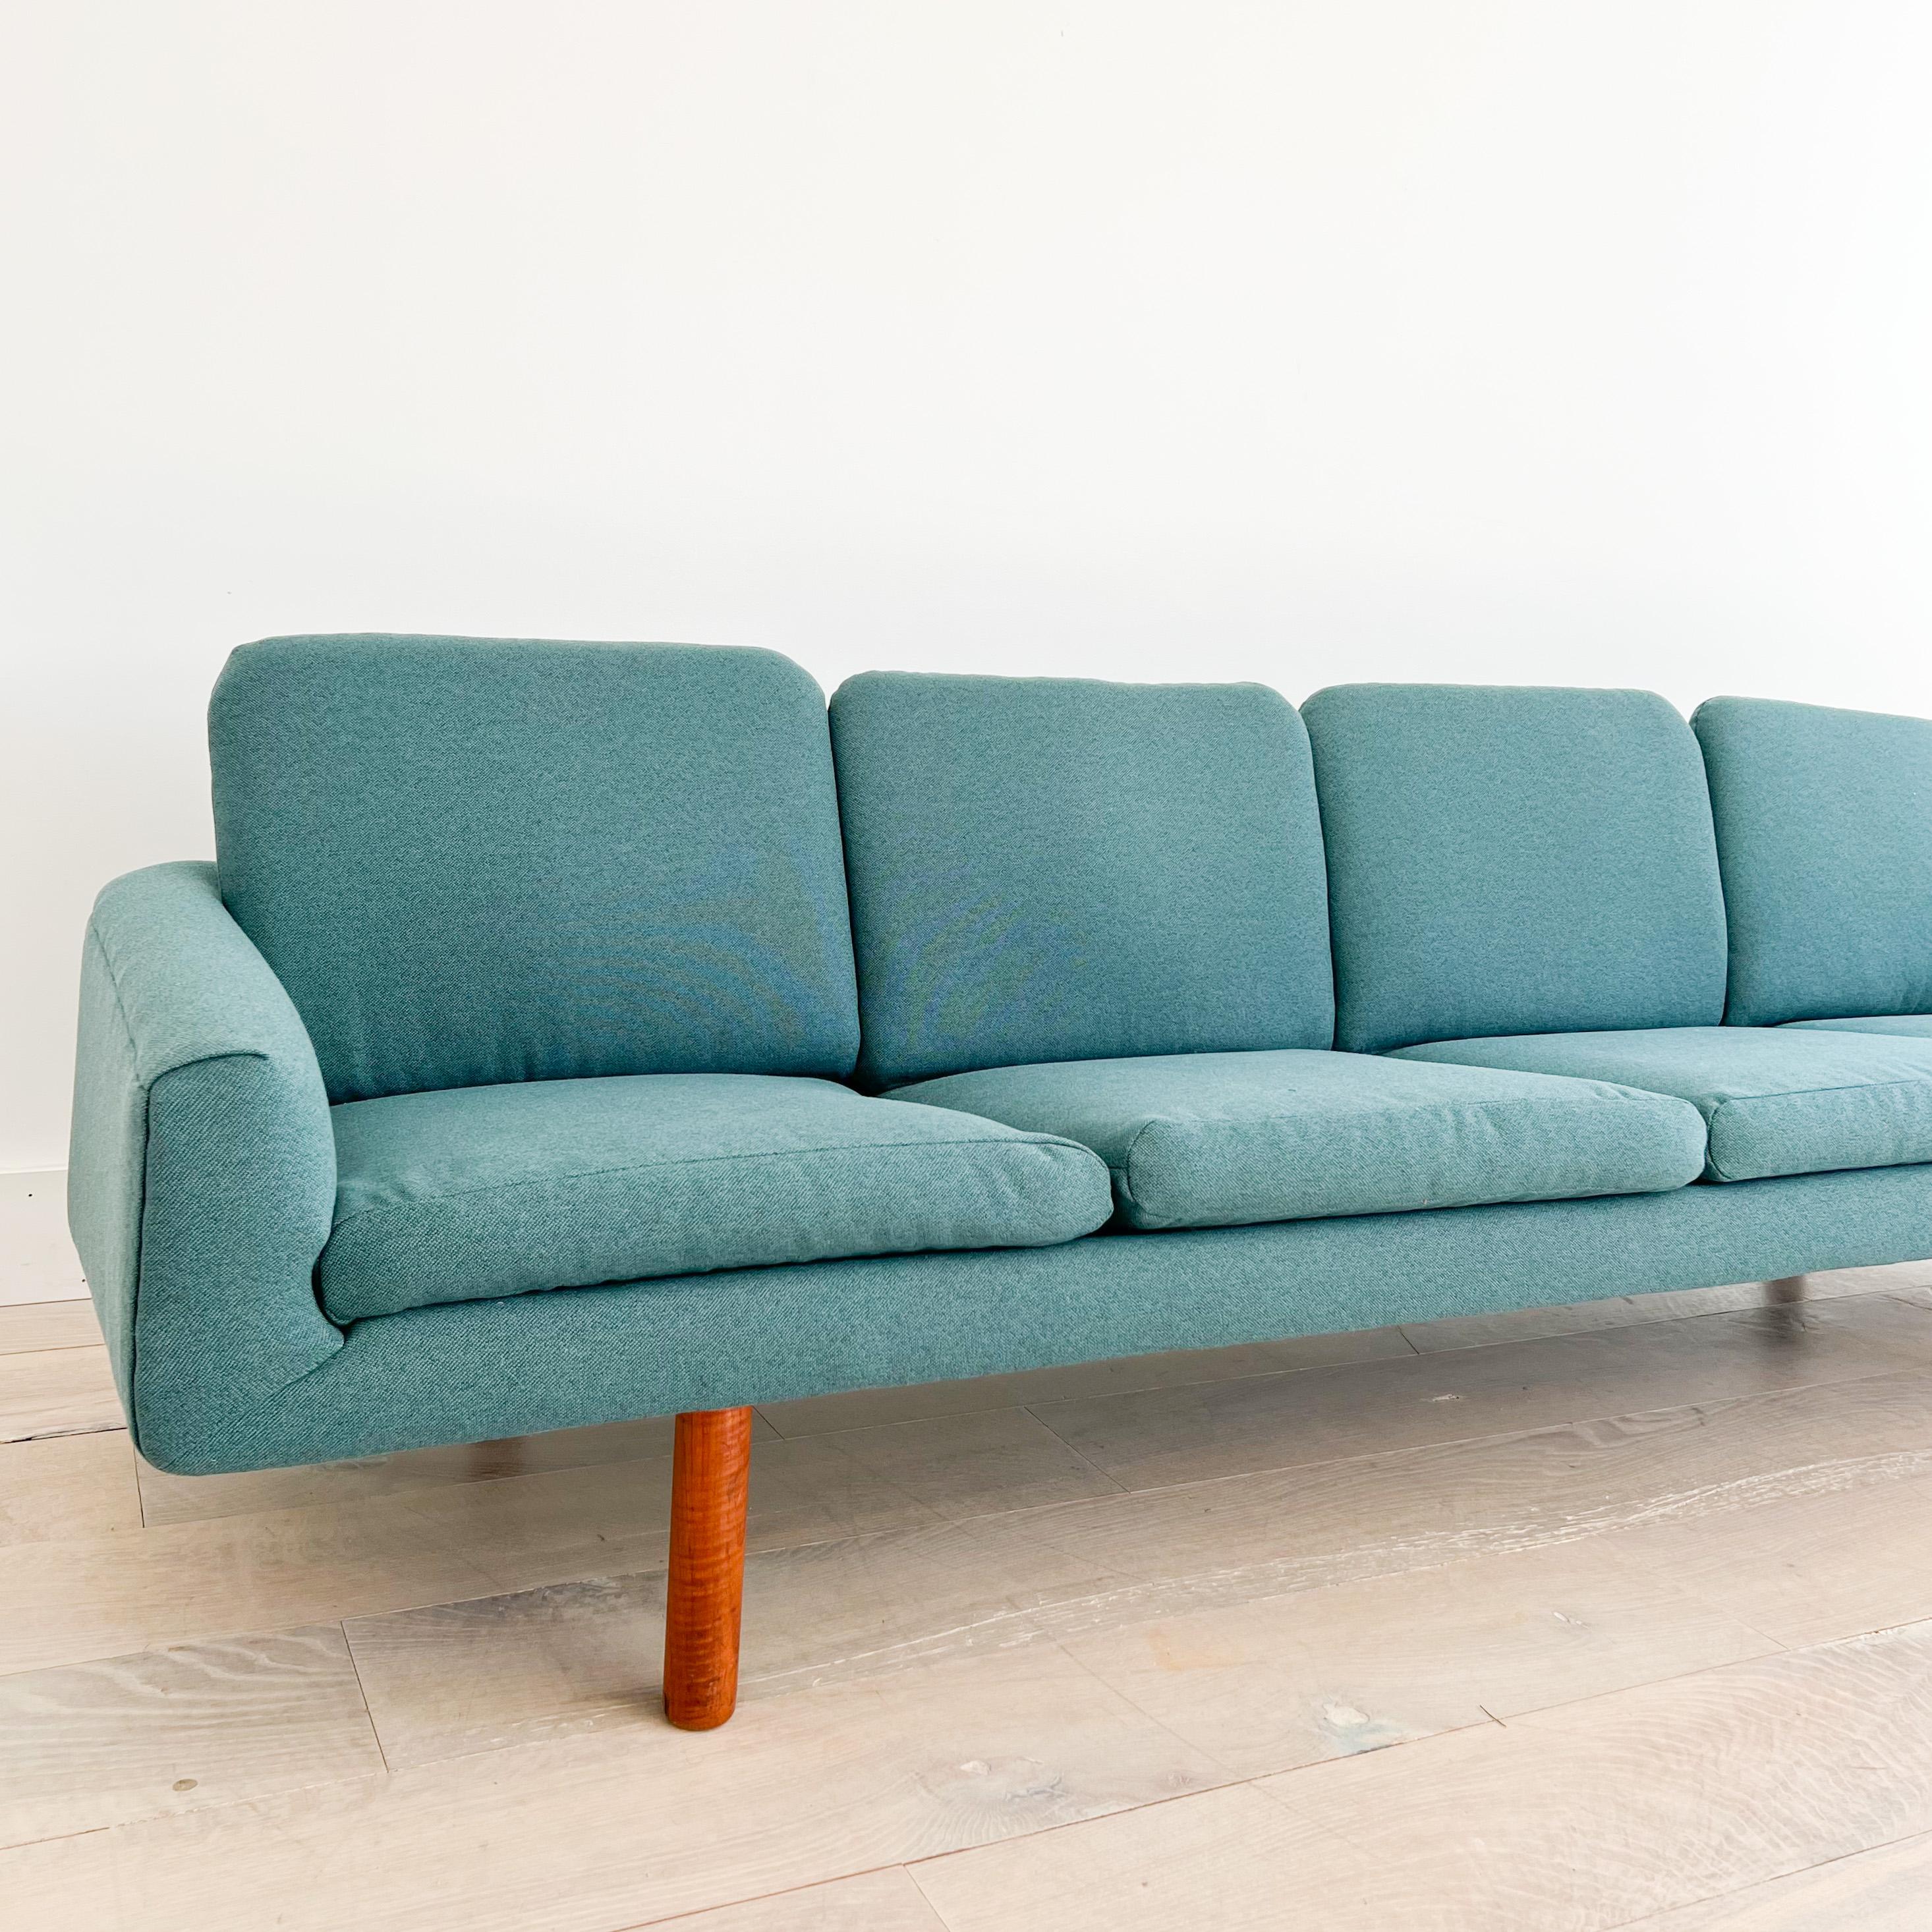 Mid century modern long 4 seater danish sofa with round teak legs. New foam and teal upholstery. Some light scuffing/scratching to the teak legs from age appropriate wear.